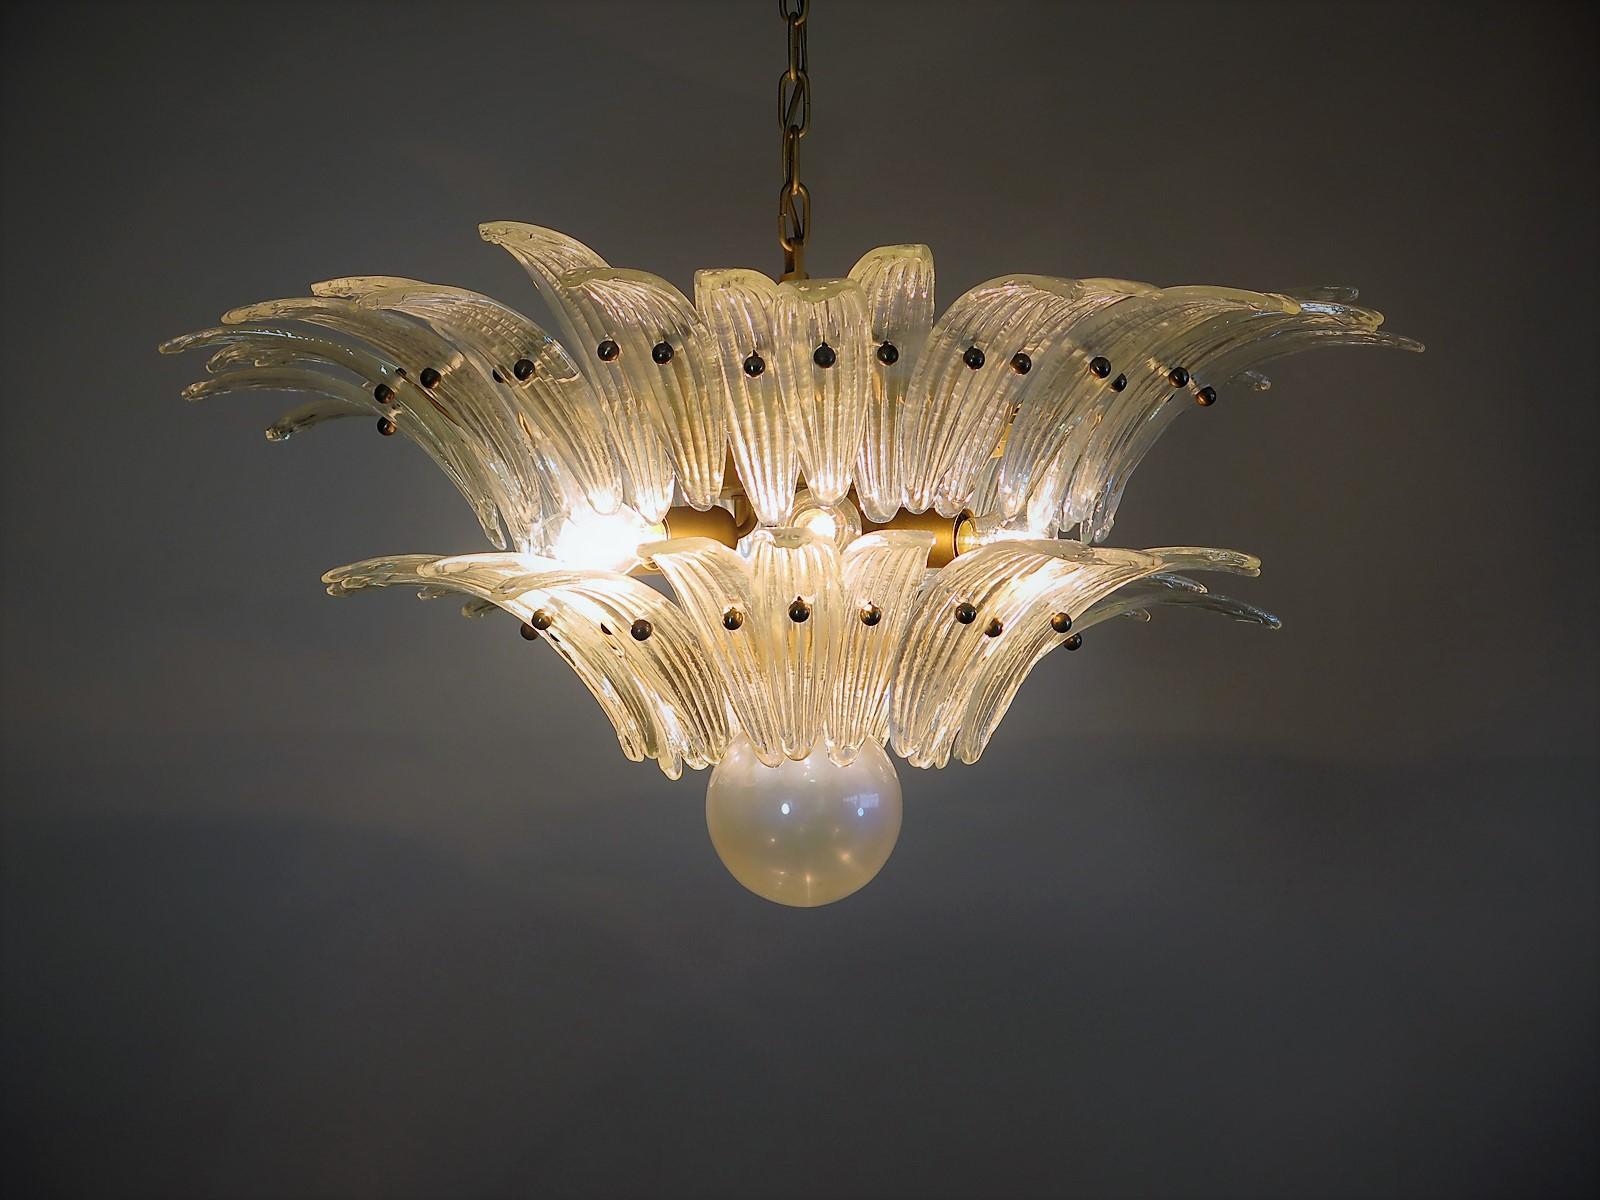 Luxury and GENUINE Murano Glass chandelier. HAND MADE IN MURANO.  It made by 58 Murano crystal
glasses in a gold metal frame.  The chandelier has also a Murano glass ball in the end of the lamp. The originality of this wall sconces is given by the